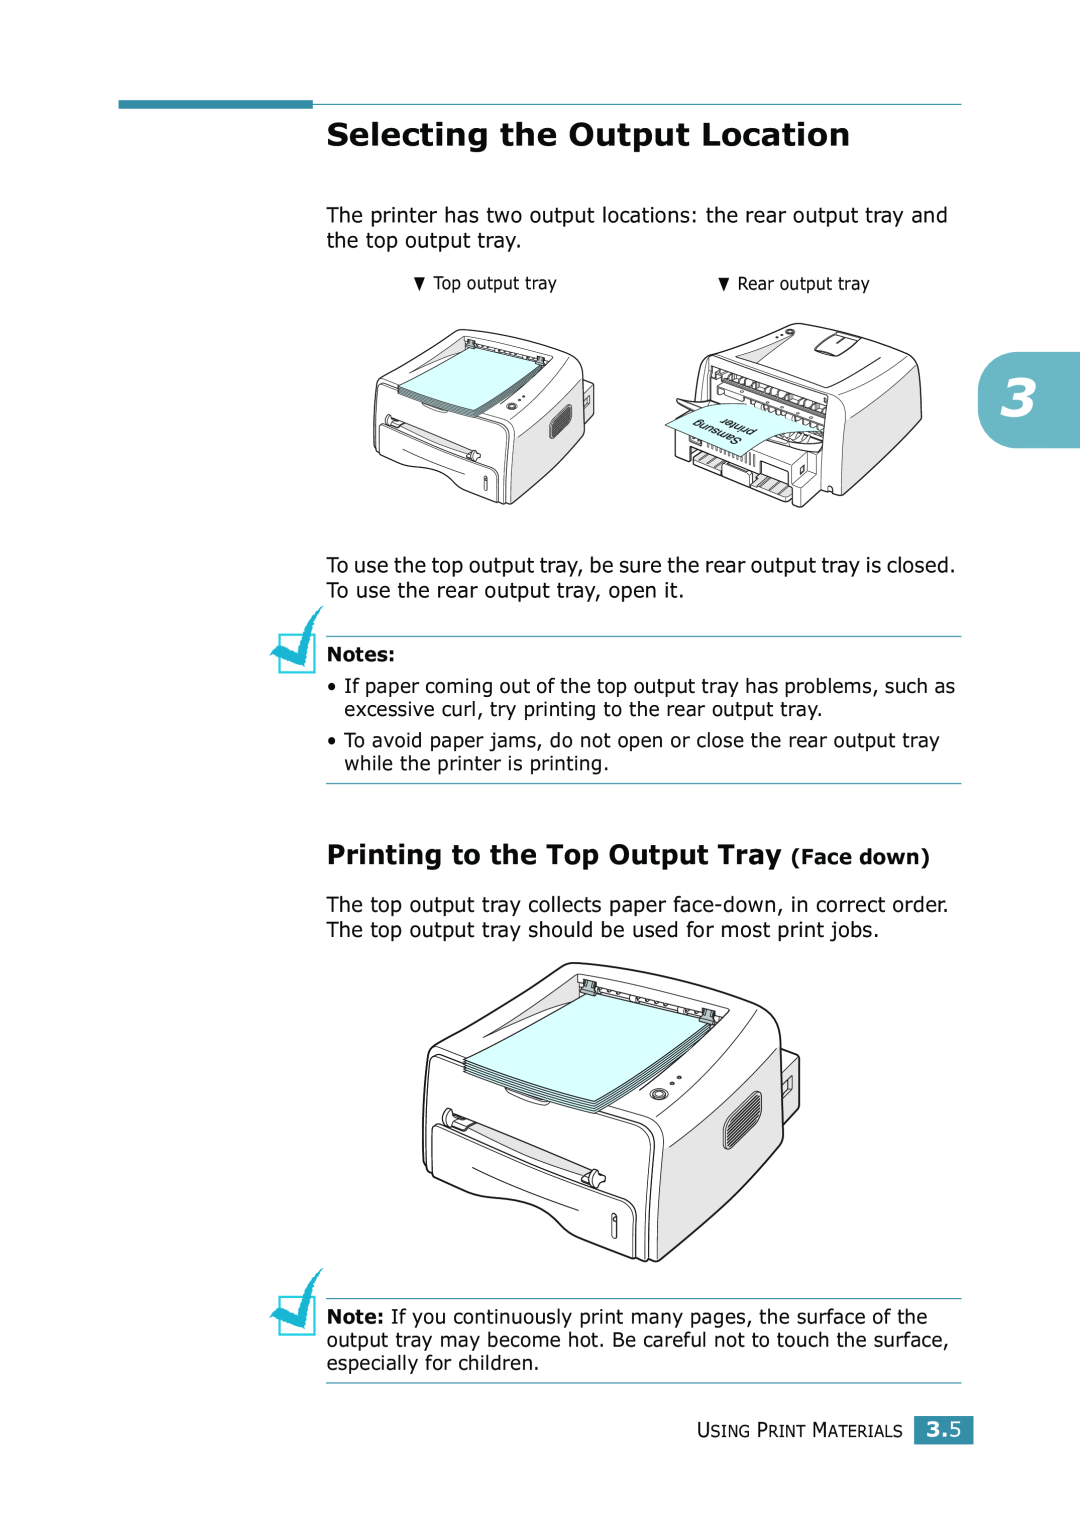 Samsung ML-1520 manual Selecting the Output Location, Printing to the Top Output Tray Face down 